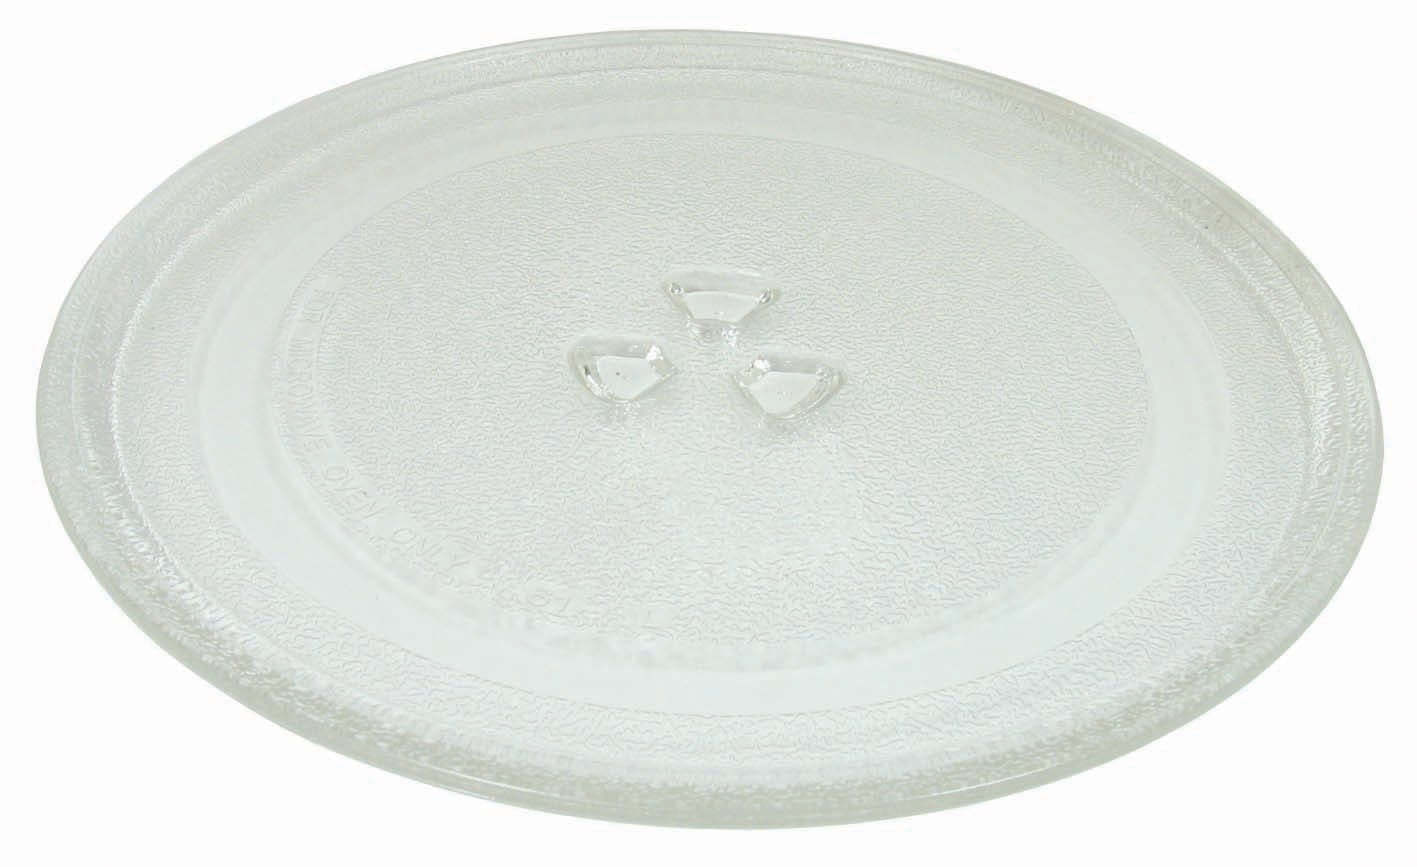 UNIVERSAL MICROWAVE PLATE GLASS TURNTABLE 27CM 270MM 10.5" DISHWASHER SAFE 34167 